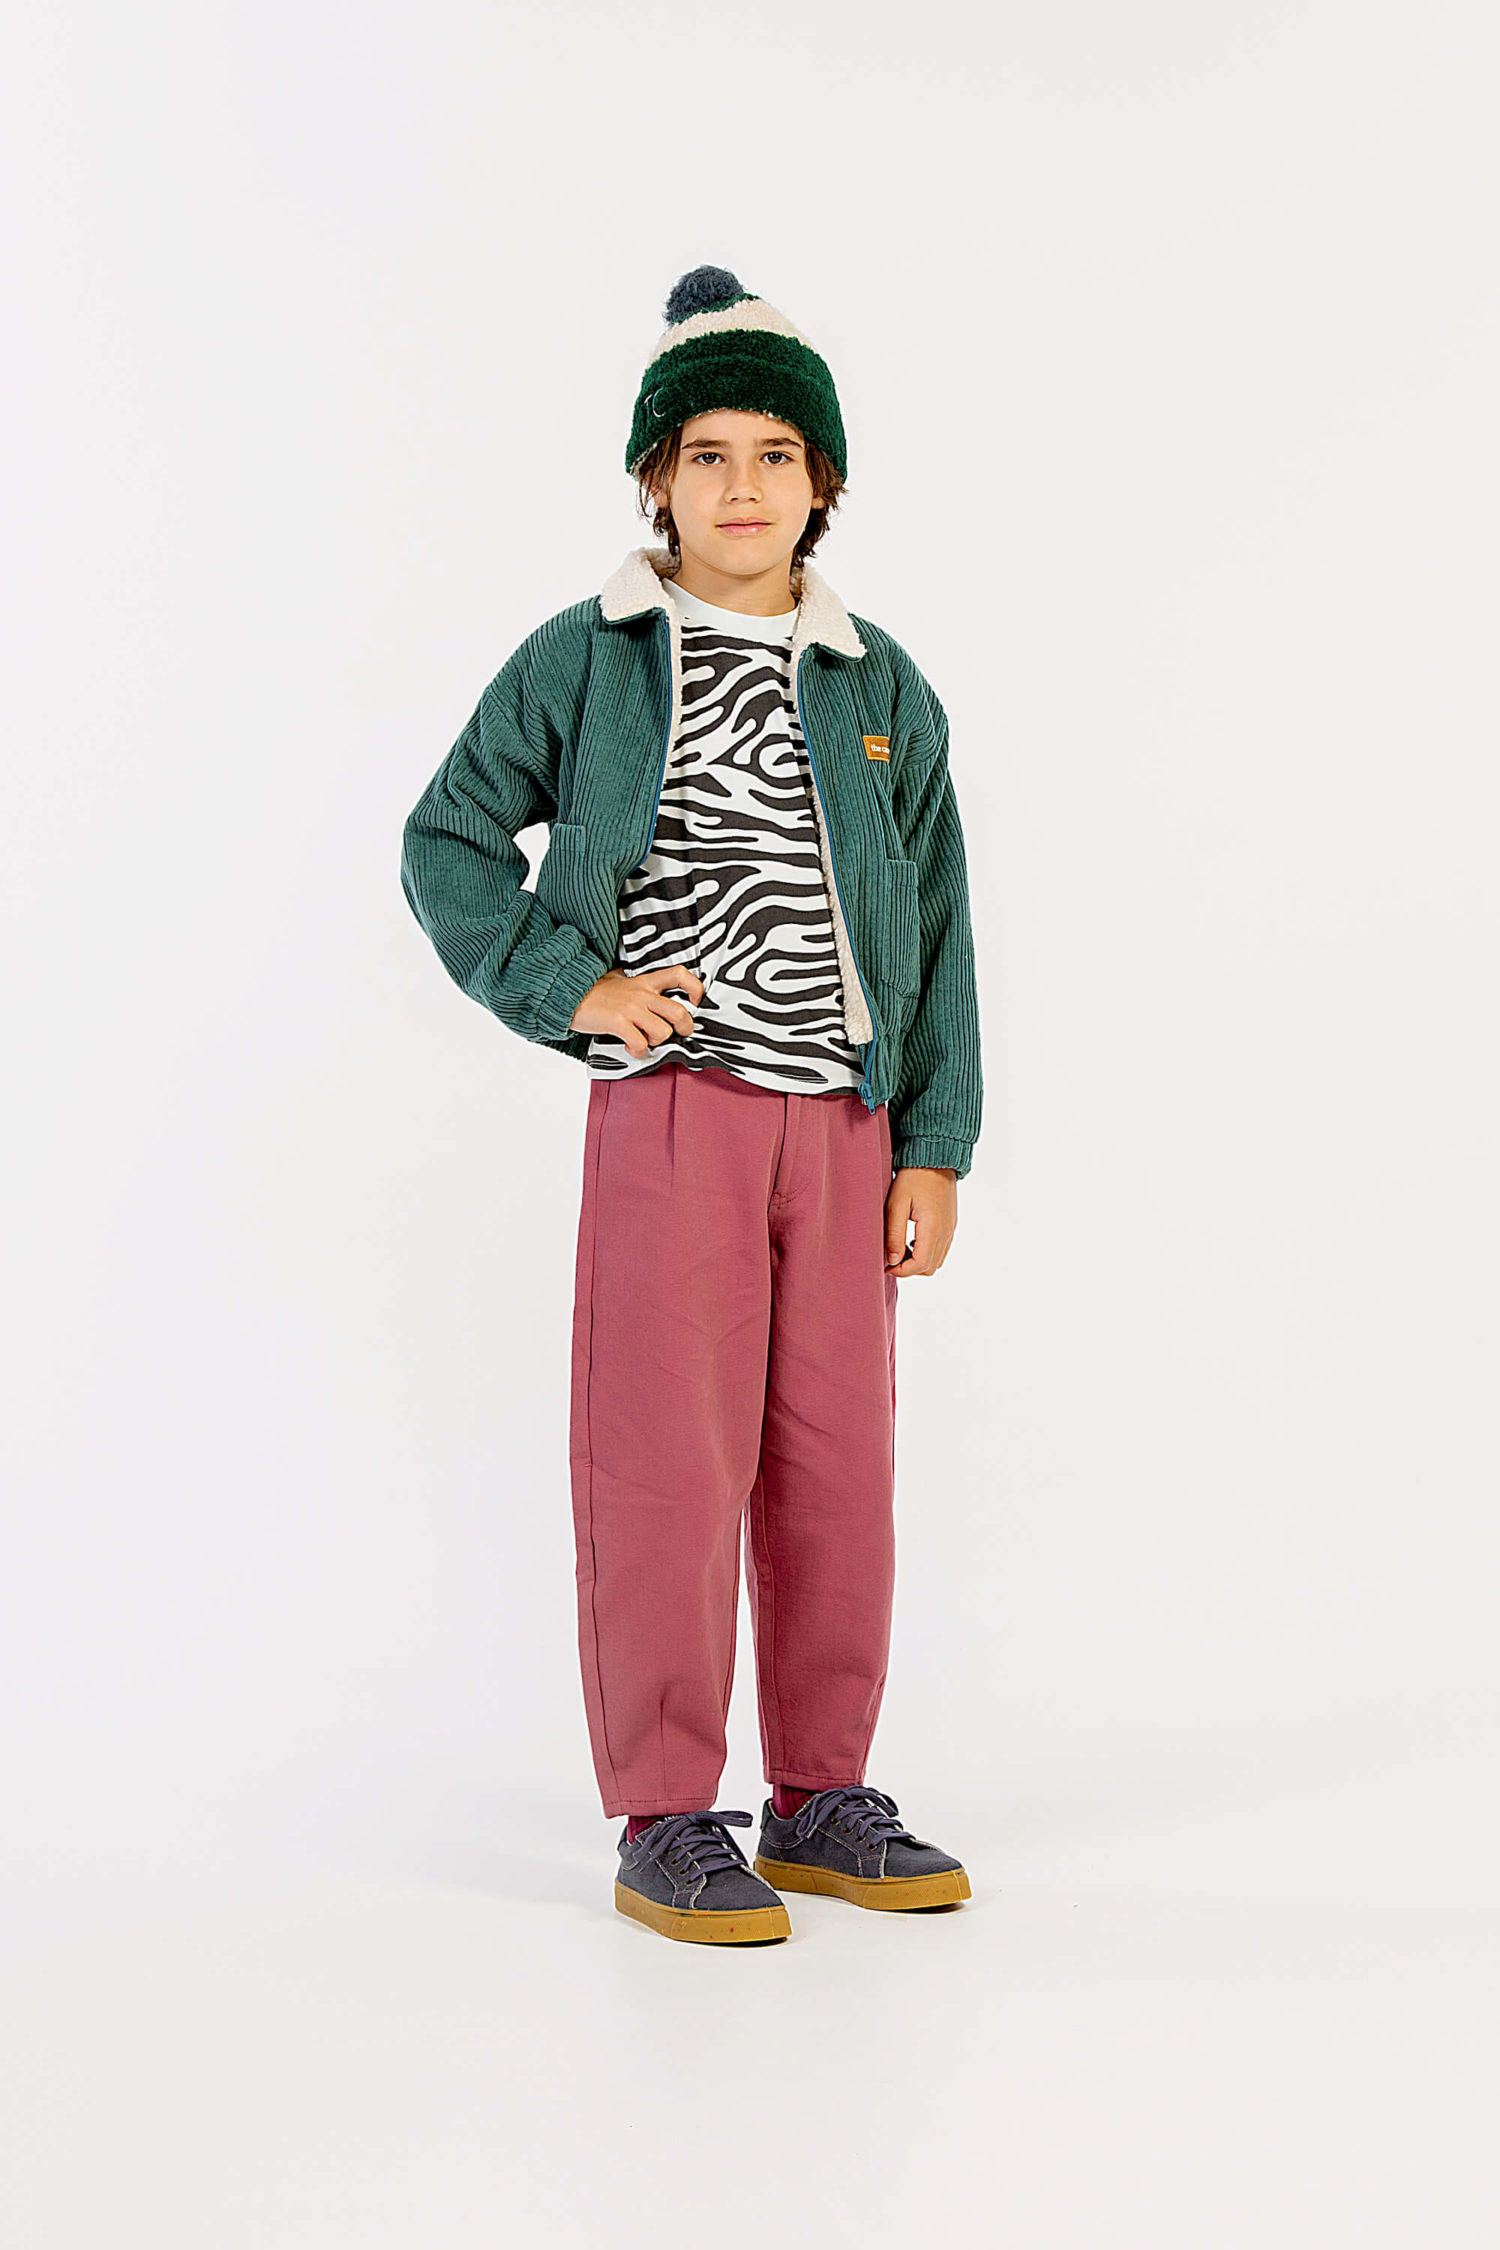 Buy comfortable clothes for girls and boys - The Campamento